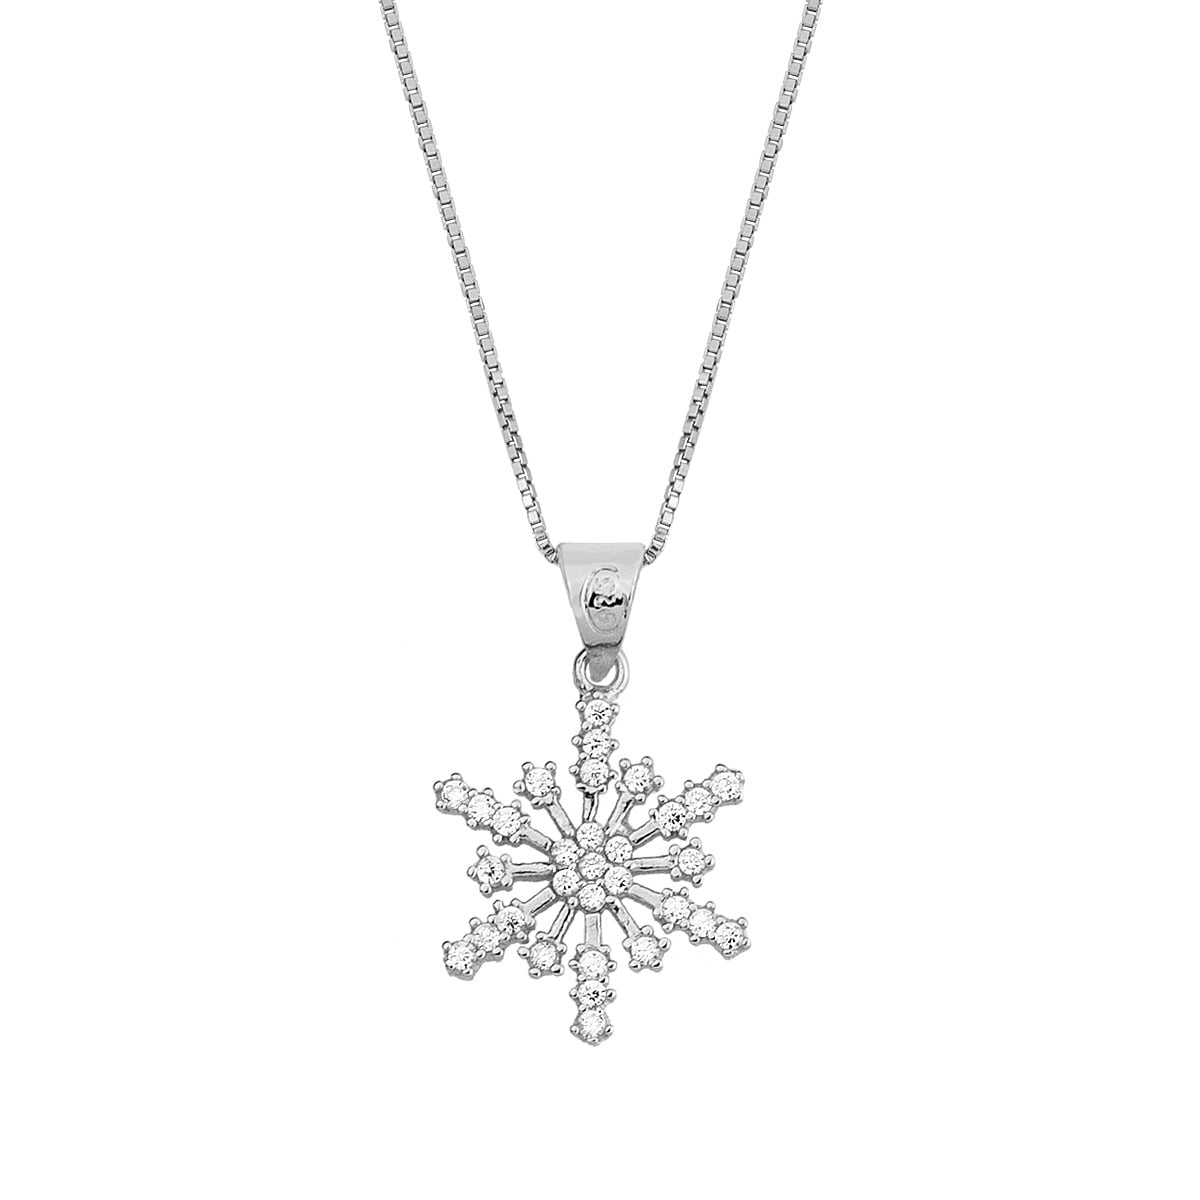 Snowflake pendant in silver 925°, decorated with white zircons. Accompanied by a silver chain 925°.